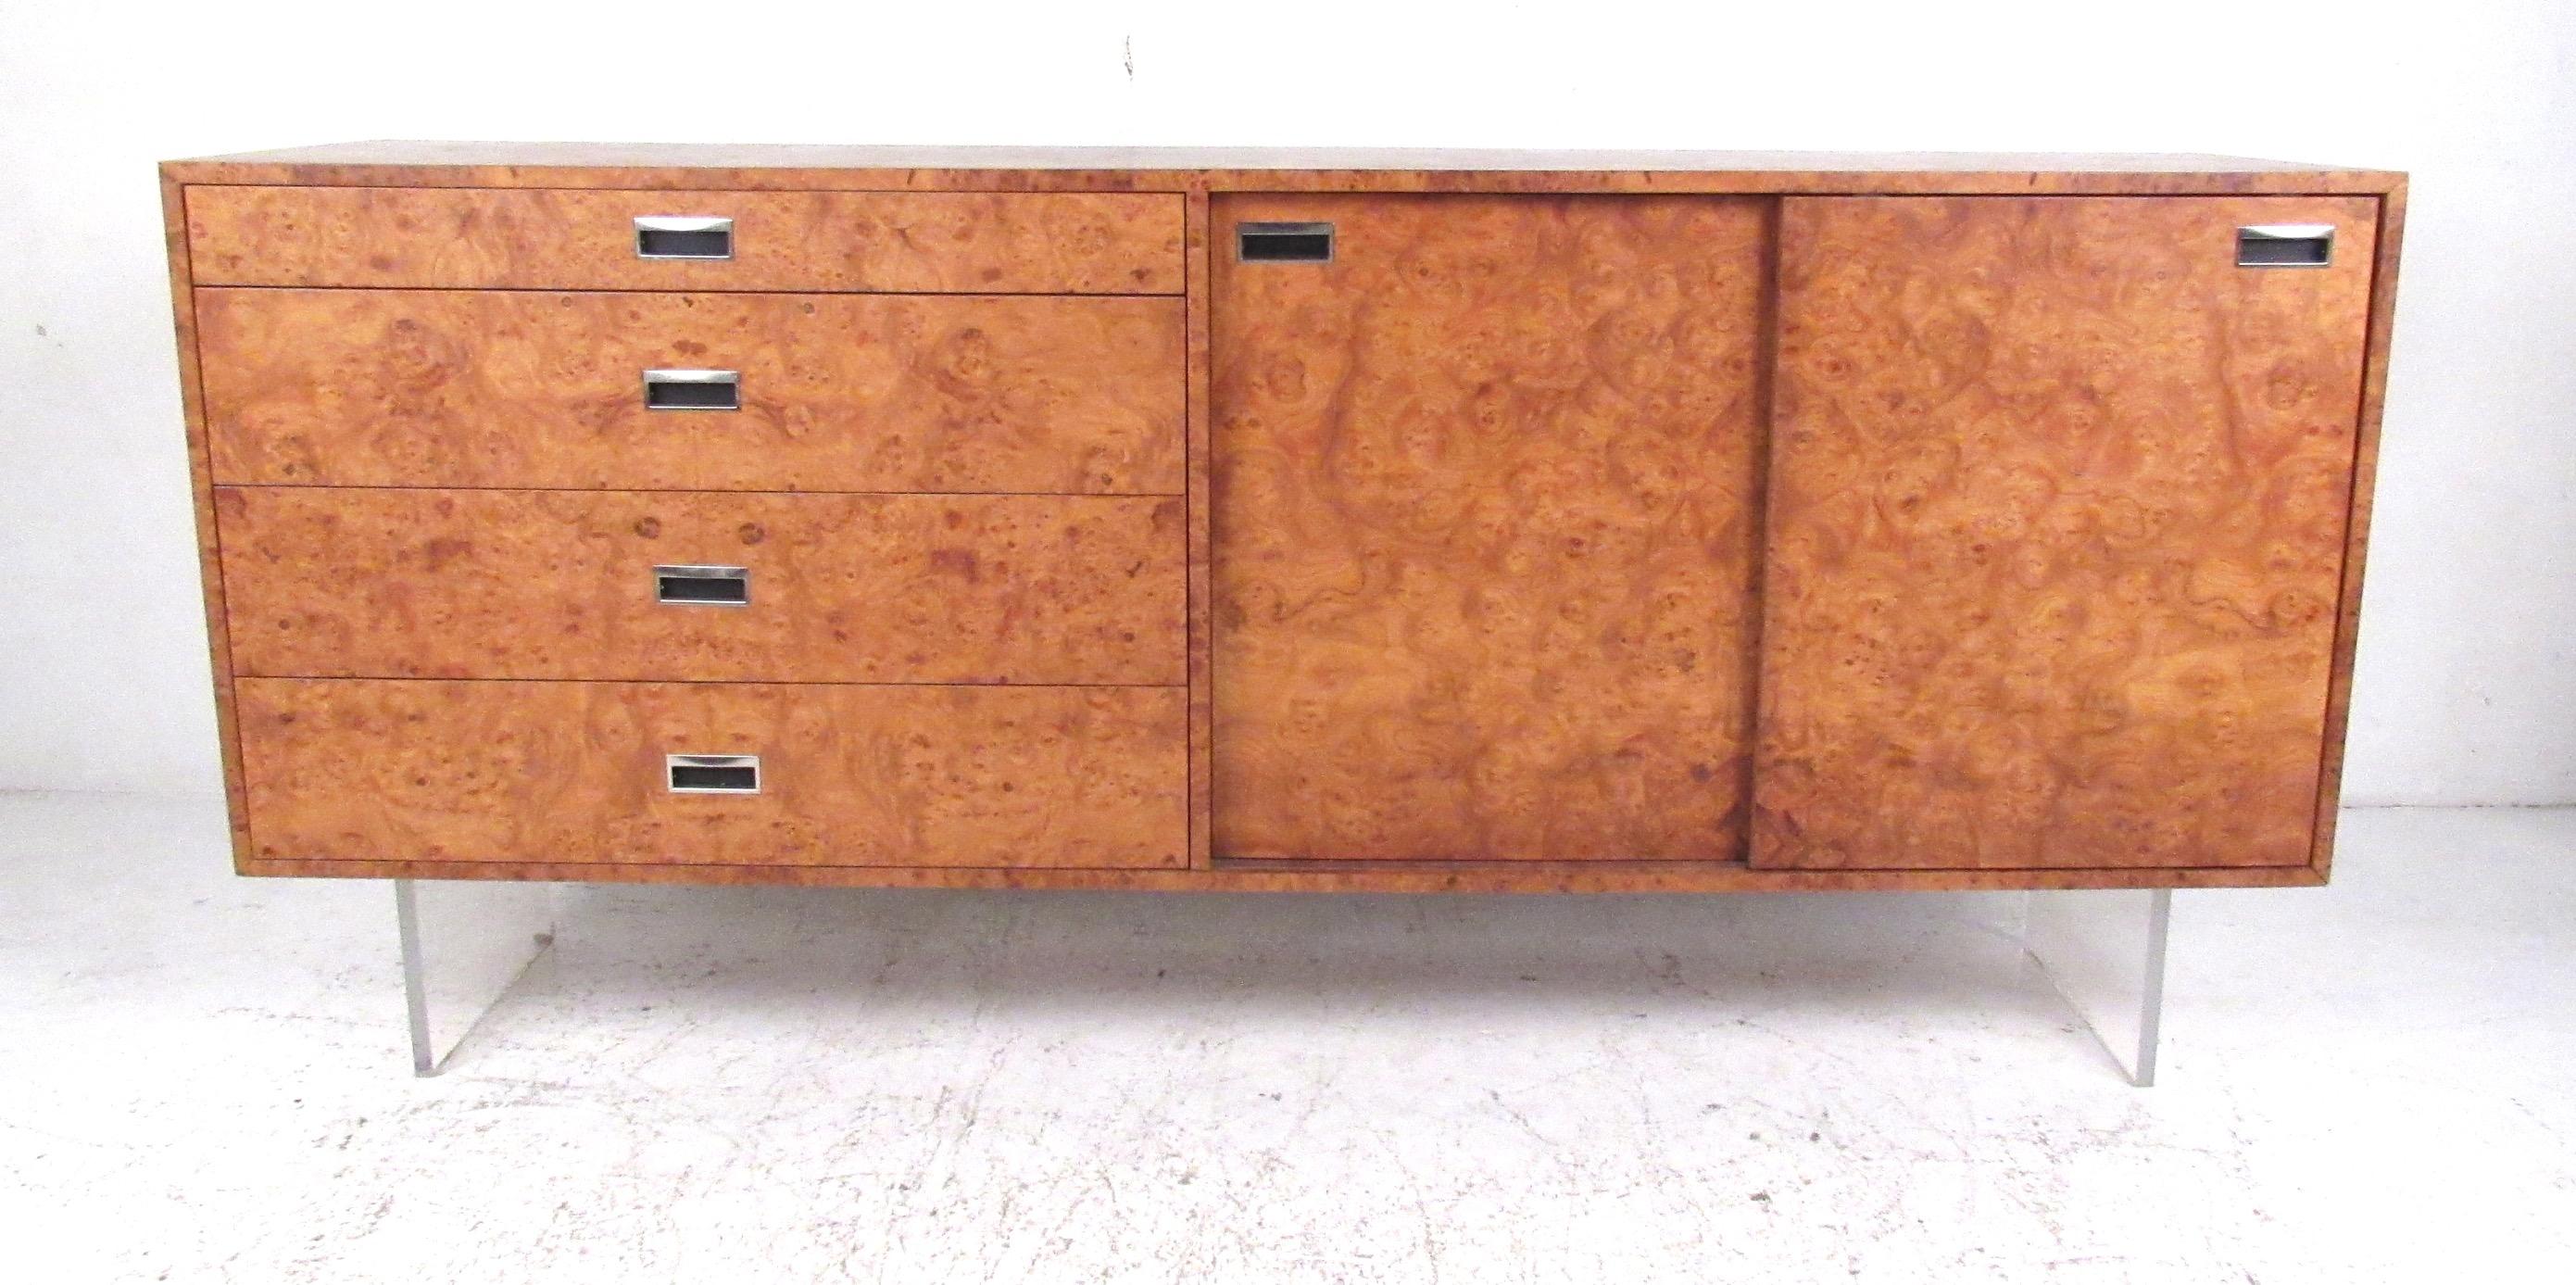 Elegant burl credenza with four storage drawers and two sliding doors which open to a pair of adjustable shelves and four trays. Beautifully detailed, this sleek cabinet is supported on a Lucite slab base giving a floating effect. Please confirm